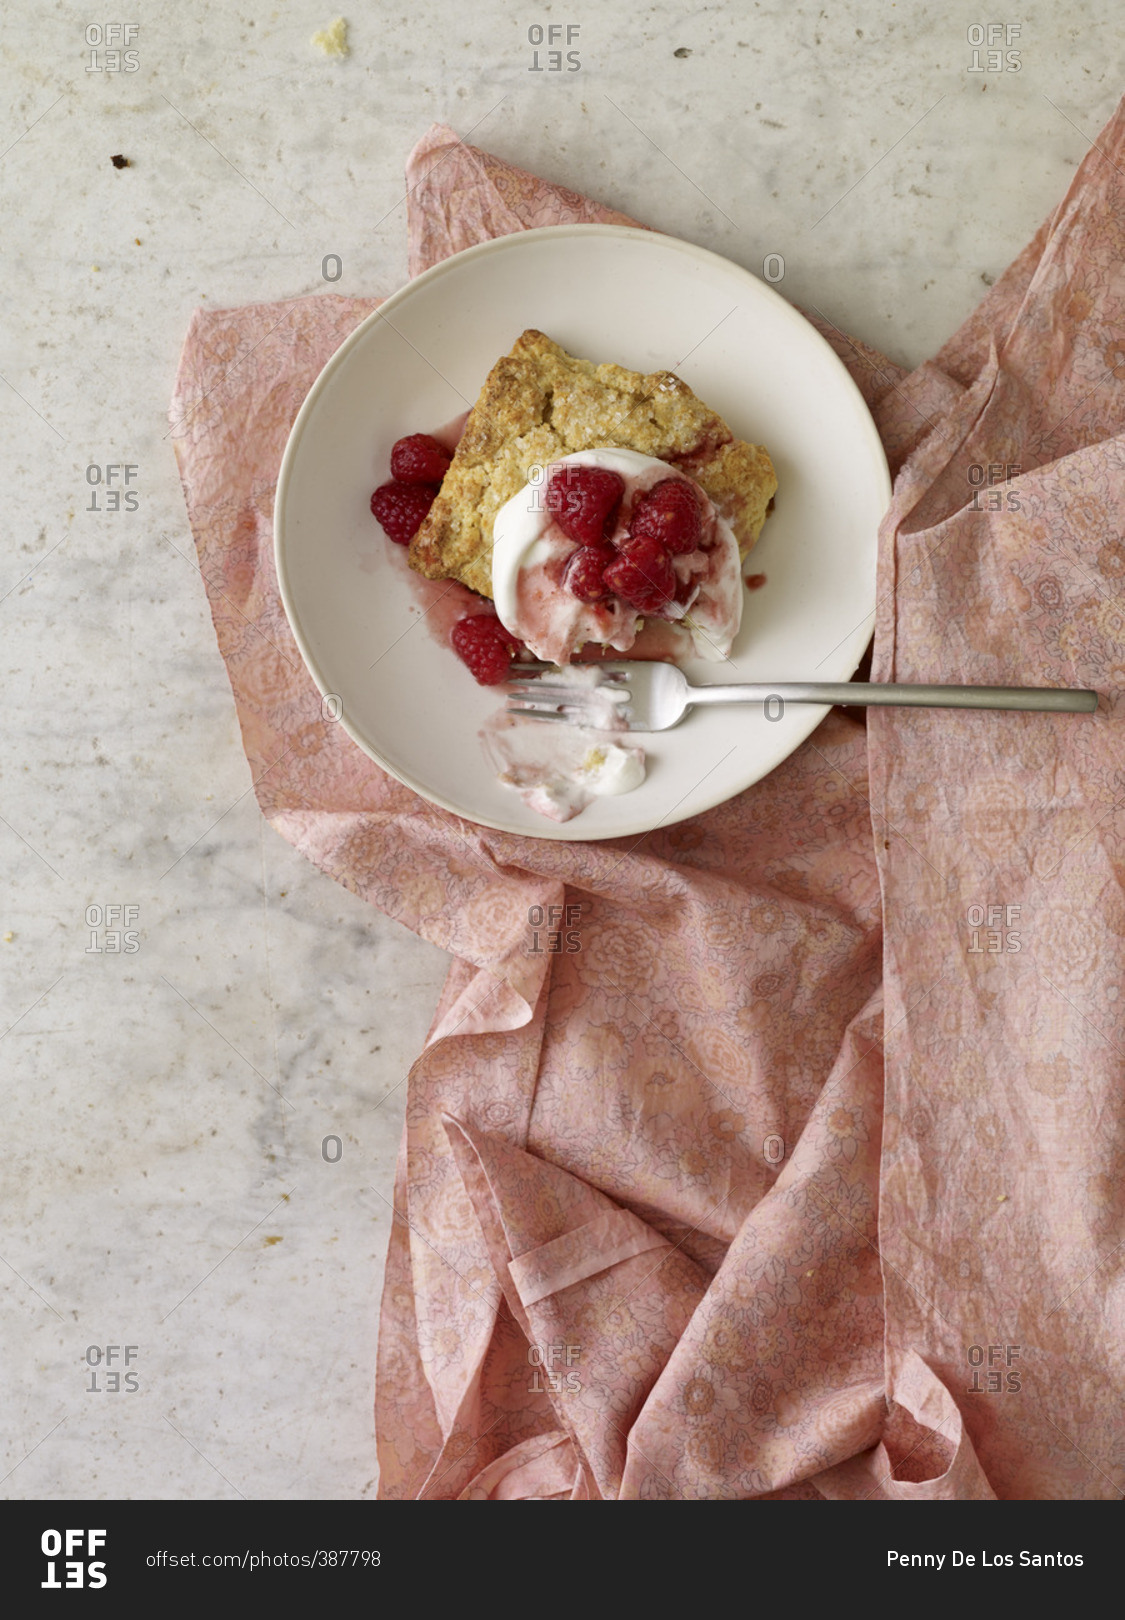 Strawberry shortcake on a plate with a fork and a pink floral cloth